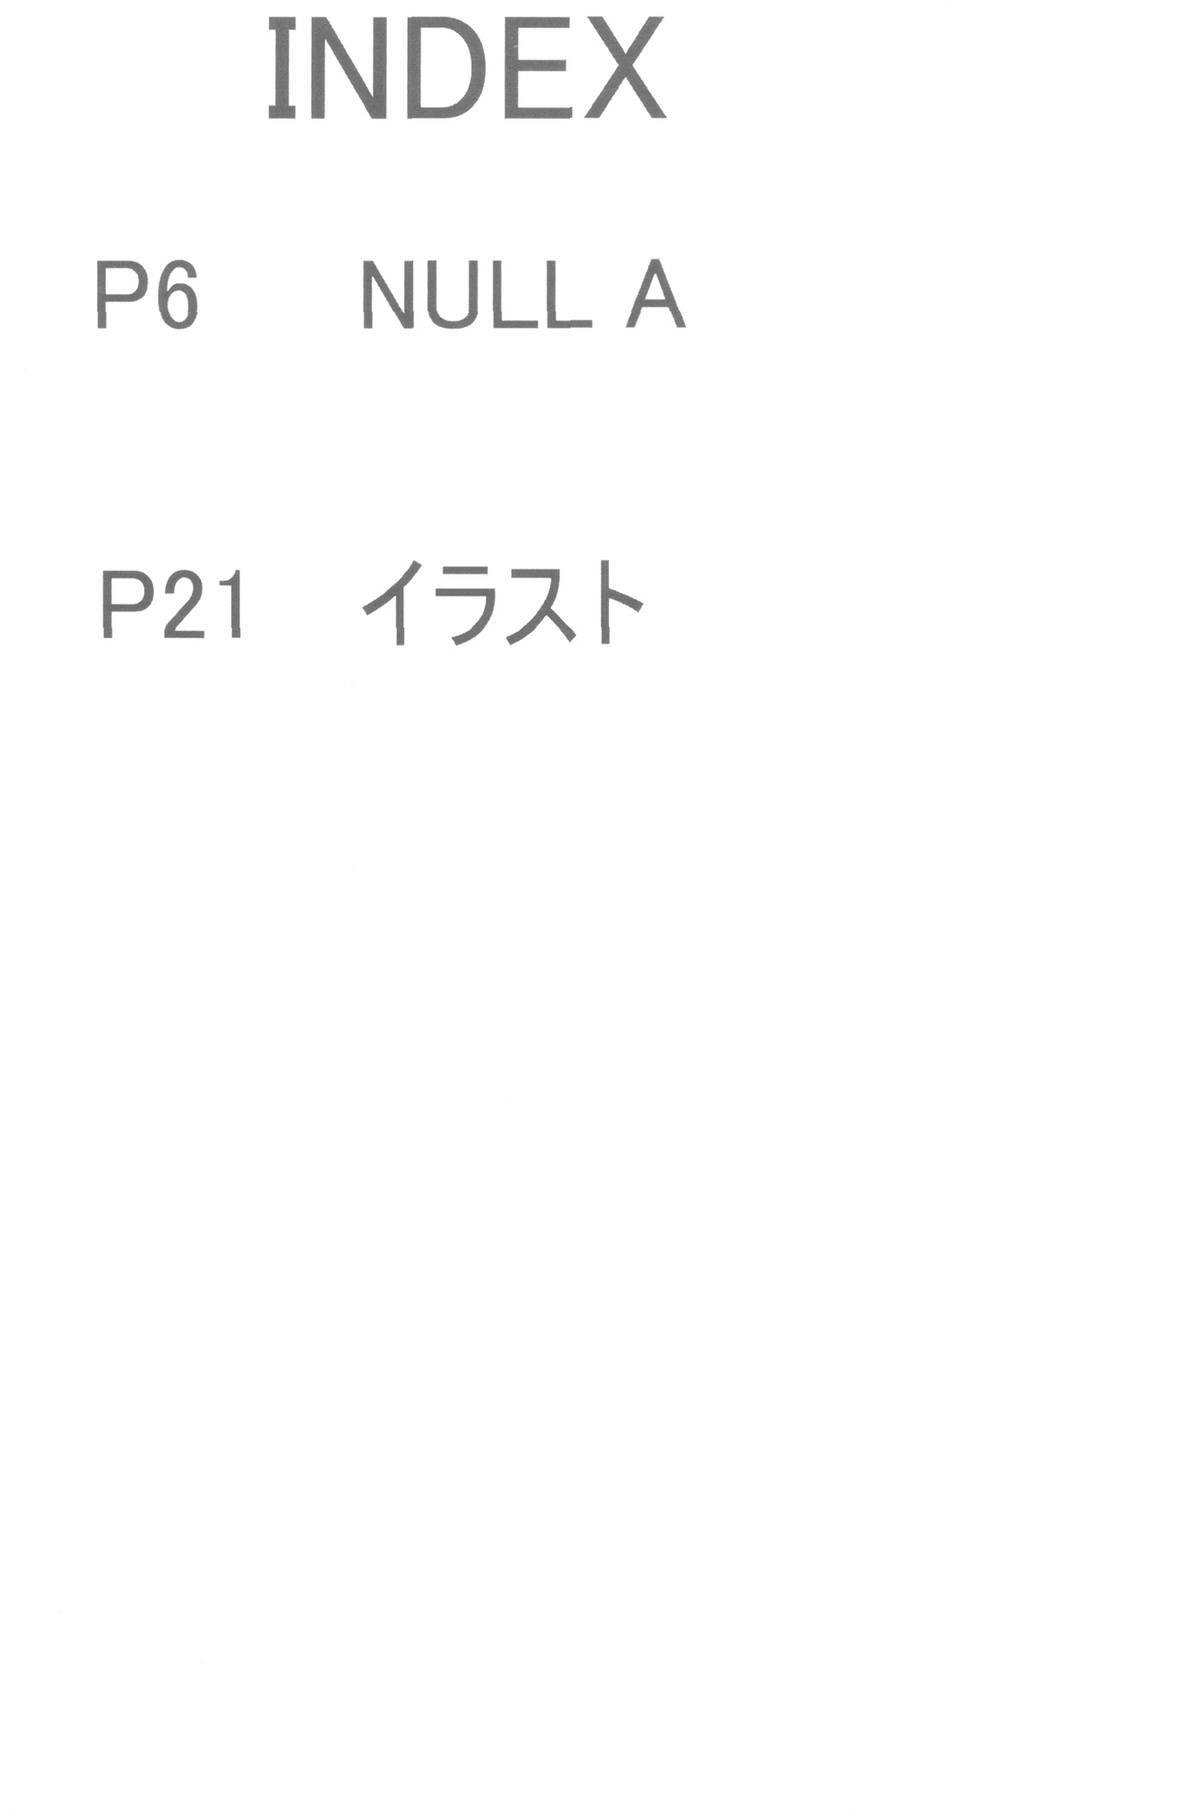 NULL A 2